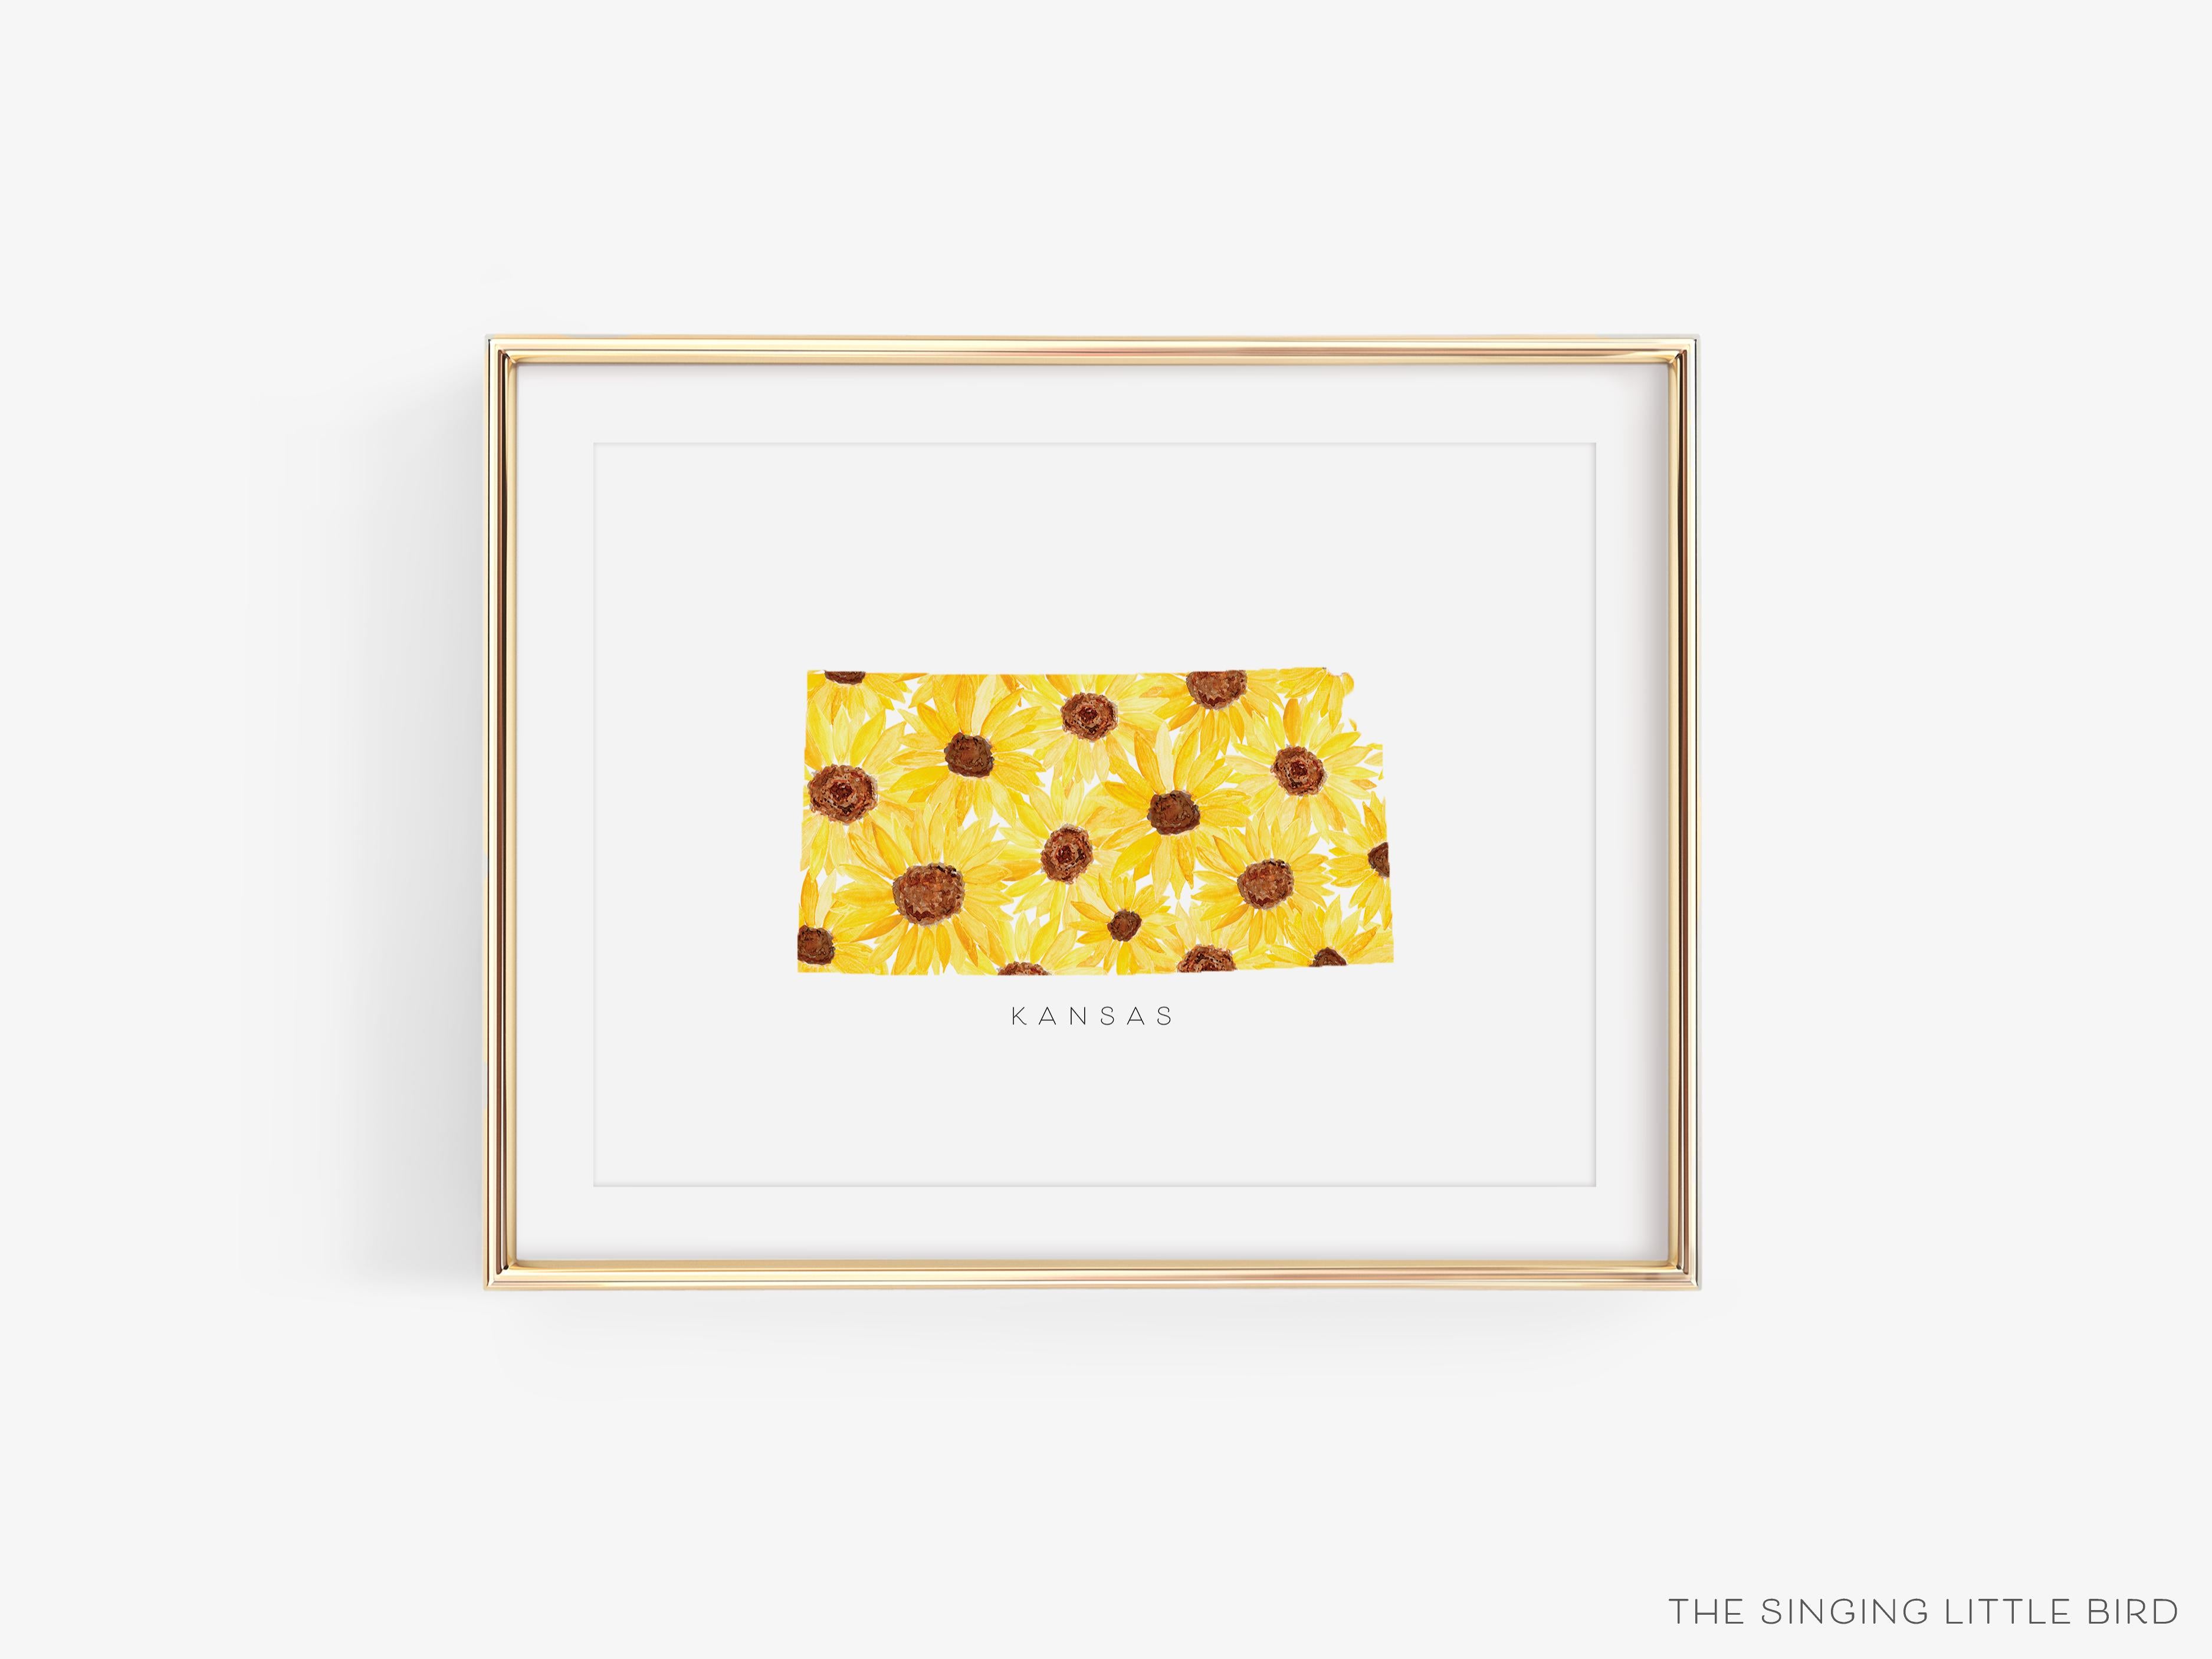 Kansas Sunflower Art Print-This watercolor art print features our hand-painted sunflowers, printed in the USA on 120lb high quality art paper. This makes a great gift or wall decor for the Kansas state flower lover in your life.-The Singing Little Bird